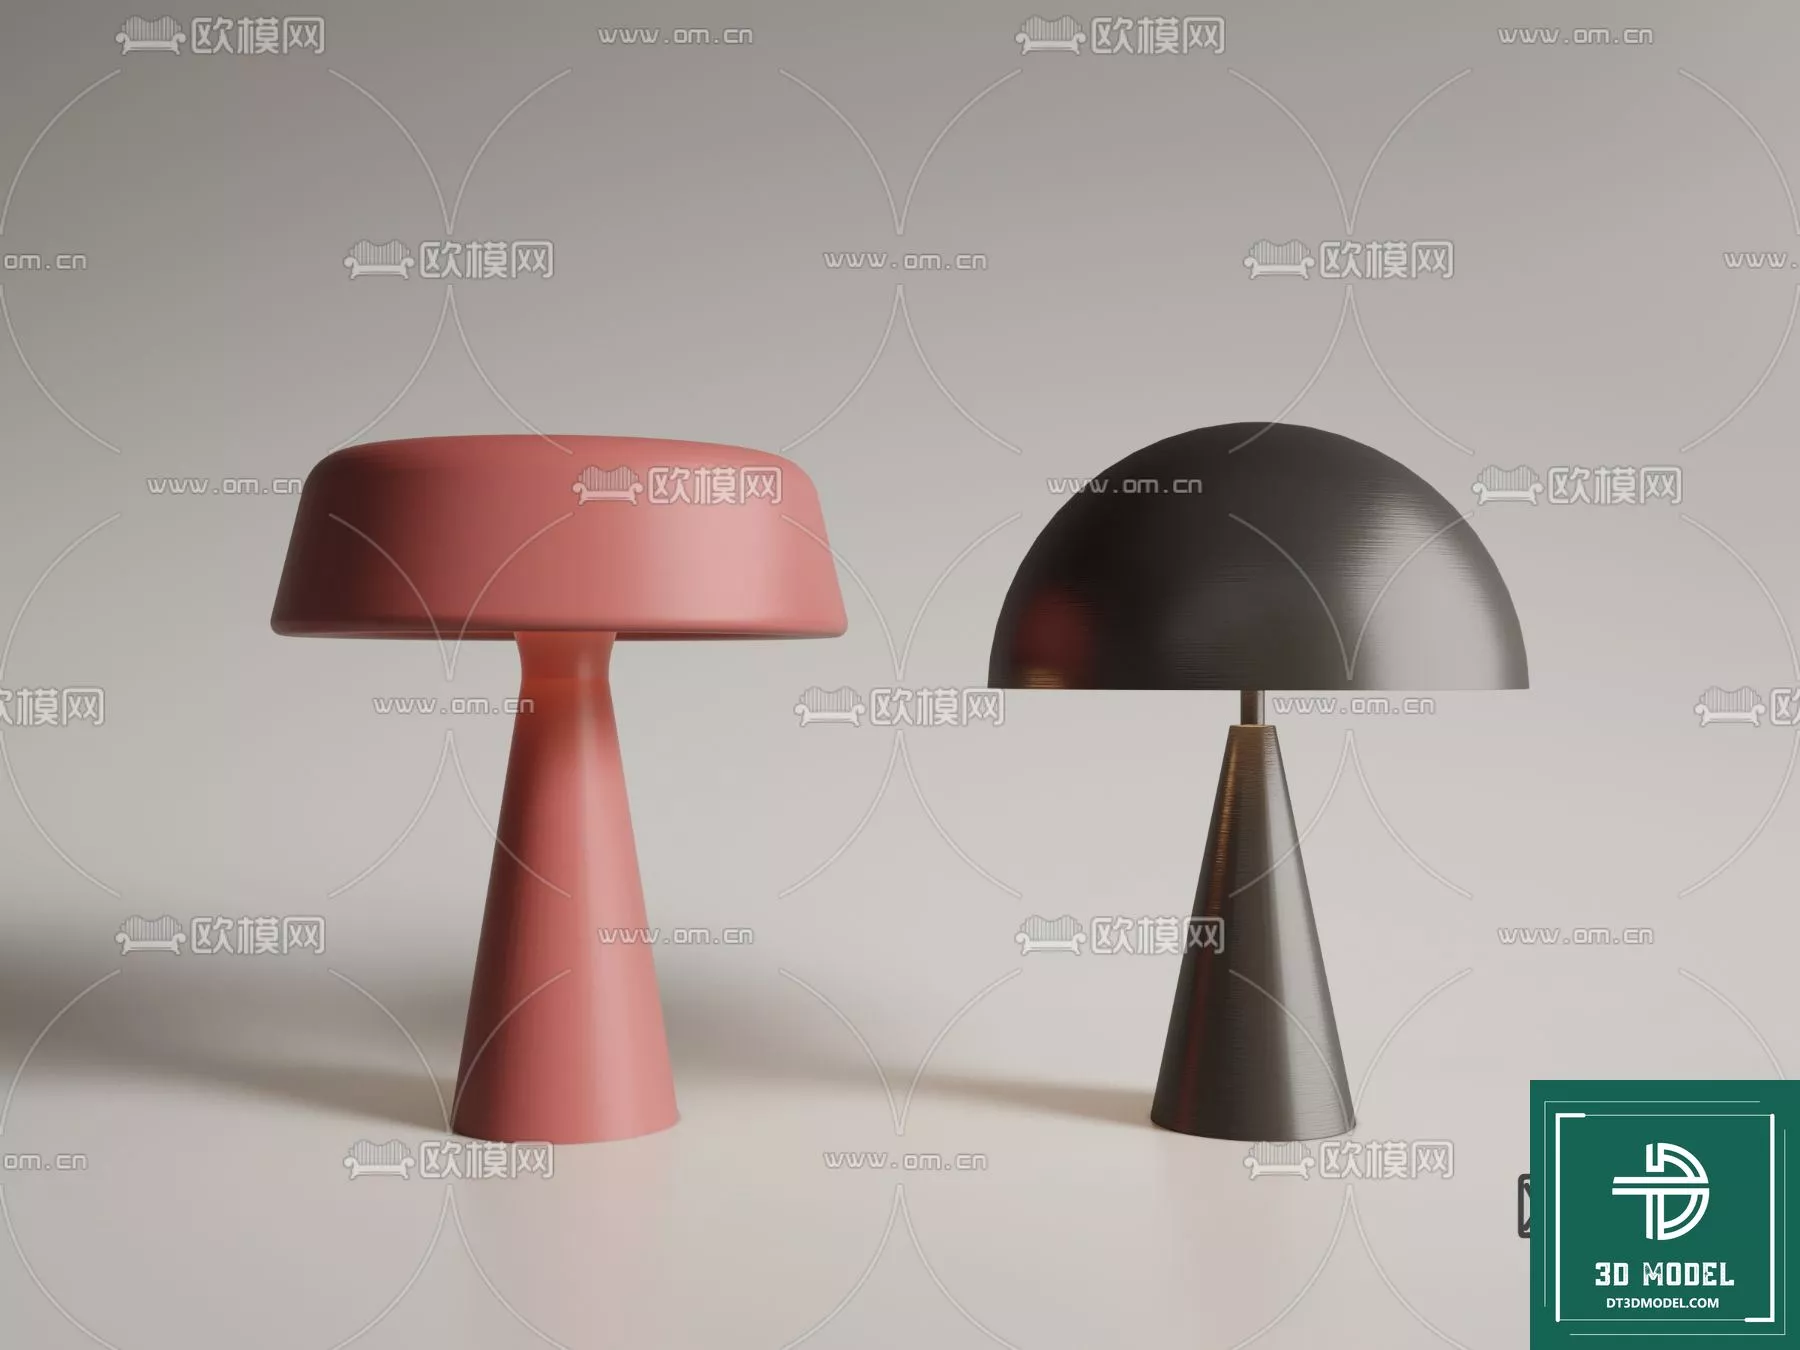 MODERN TABLE LAMP - SKETCHUP 3D MODEL - VRAY OR ENSCAPE - ID14644